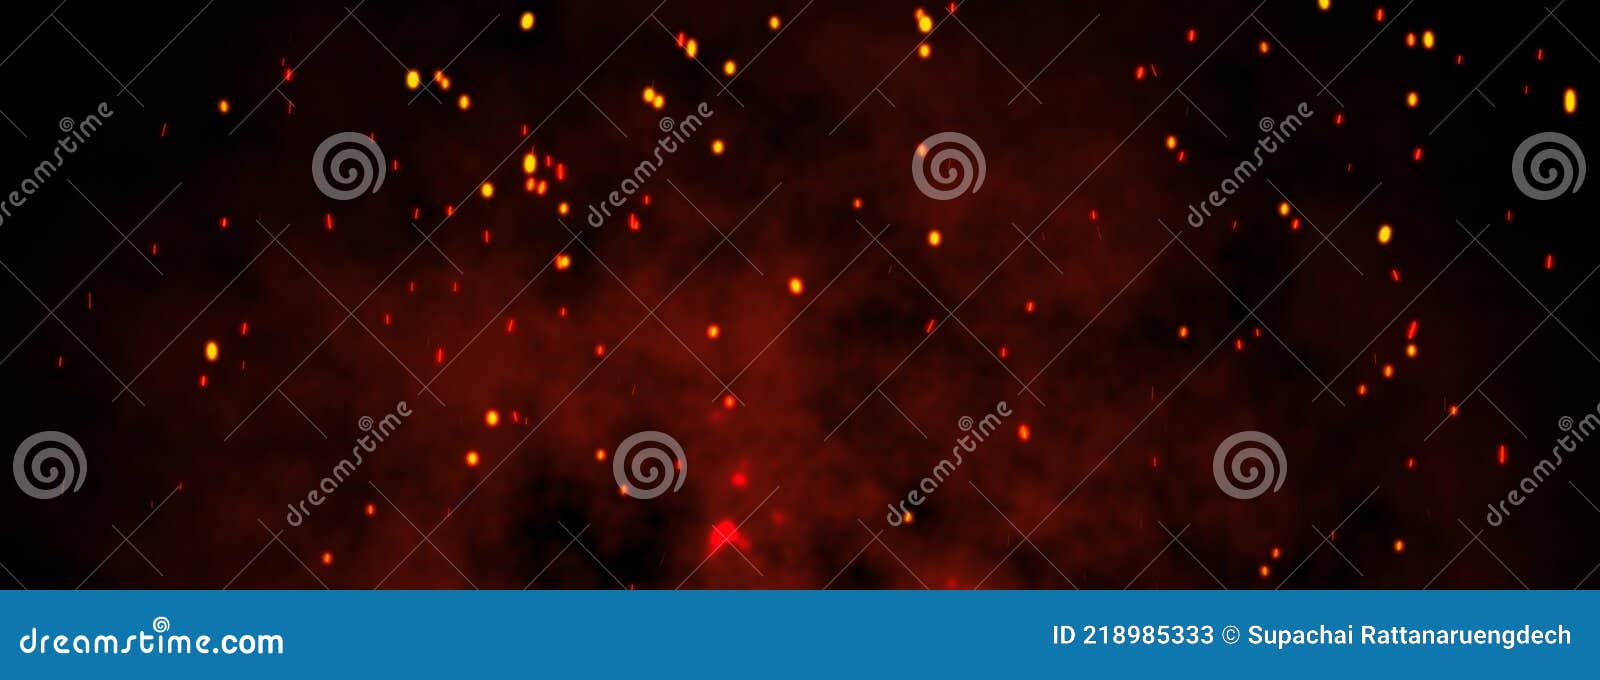 fire embers particles over black background